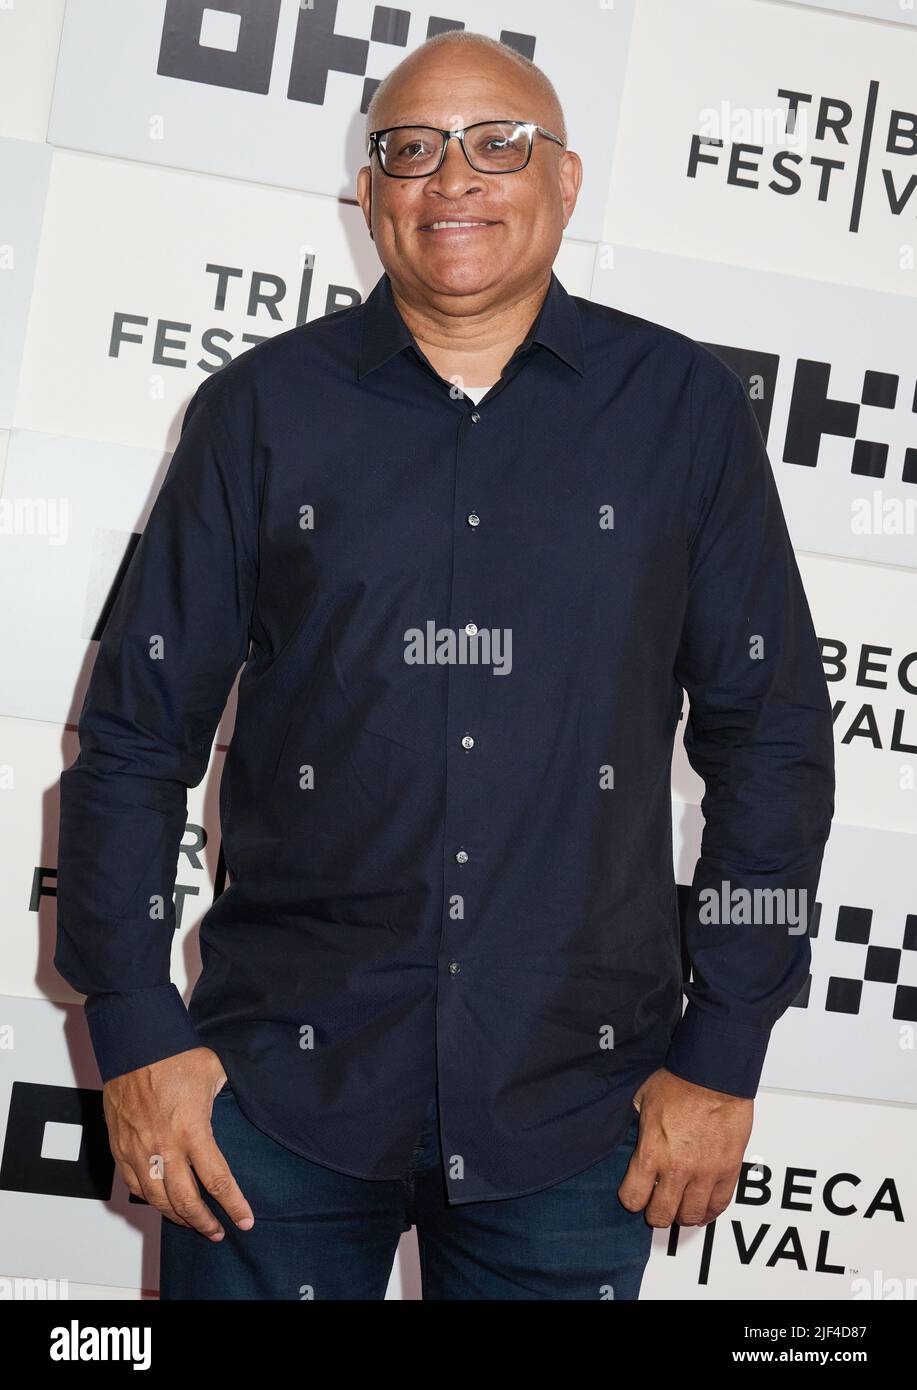 NEW YORK, NY, USA - JUNE 15, 2022: Larry Wilmore attends the Tribeca Festival Premiere of 'Jerry & Marge Go Large'. Stock Photo